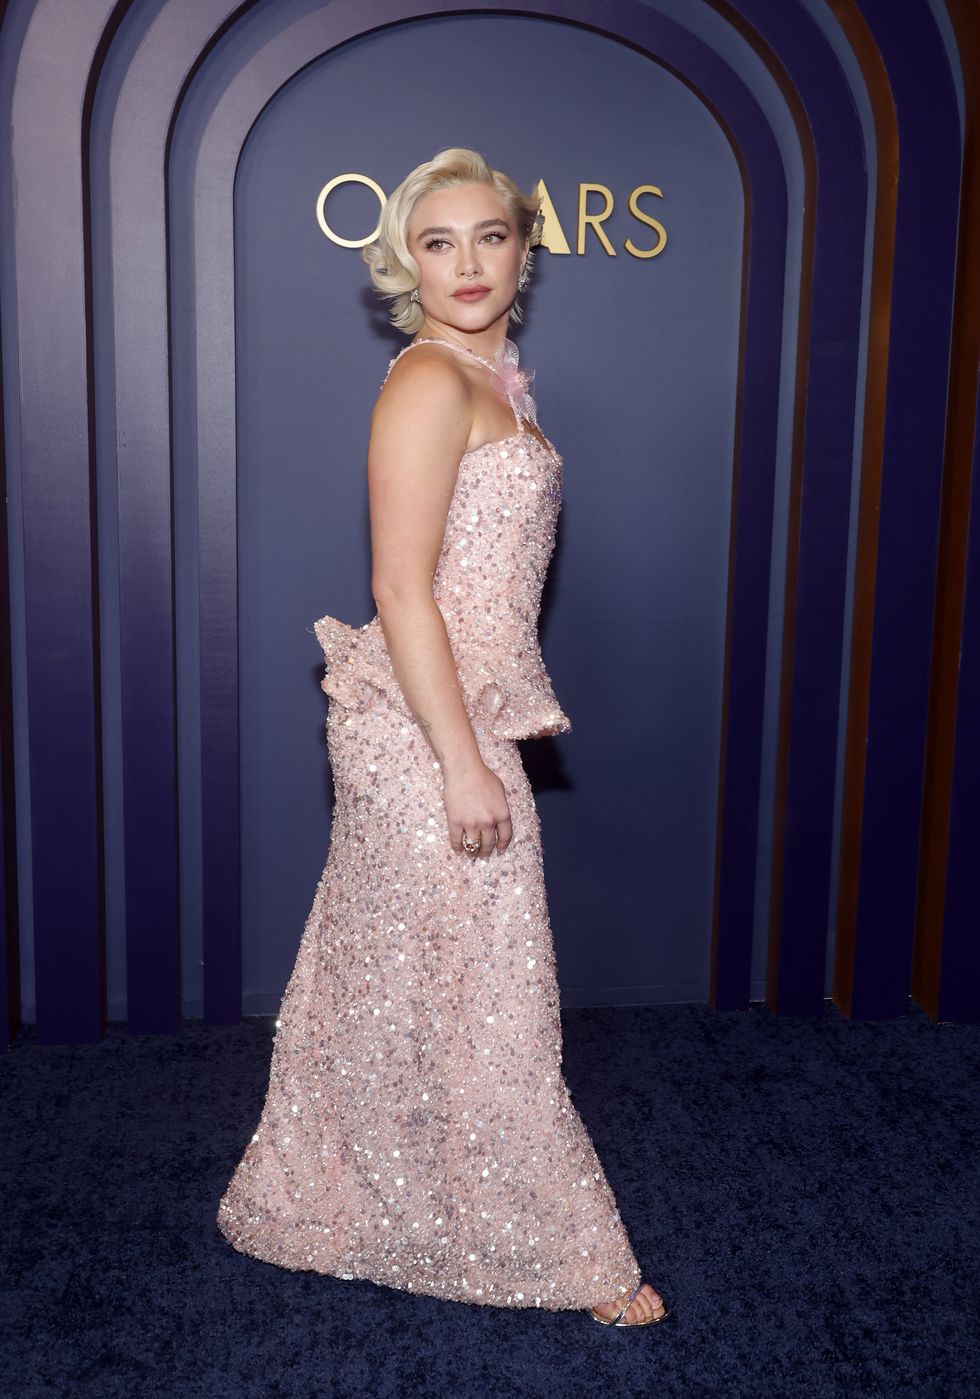 Florence Pugh Wears Glittery Pale Pink Gown to Governors Awards